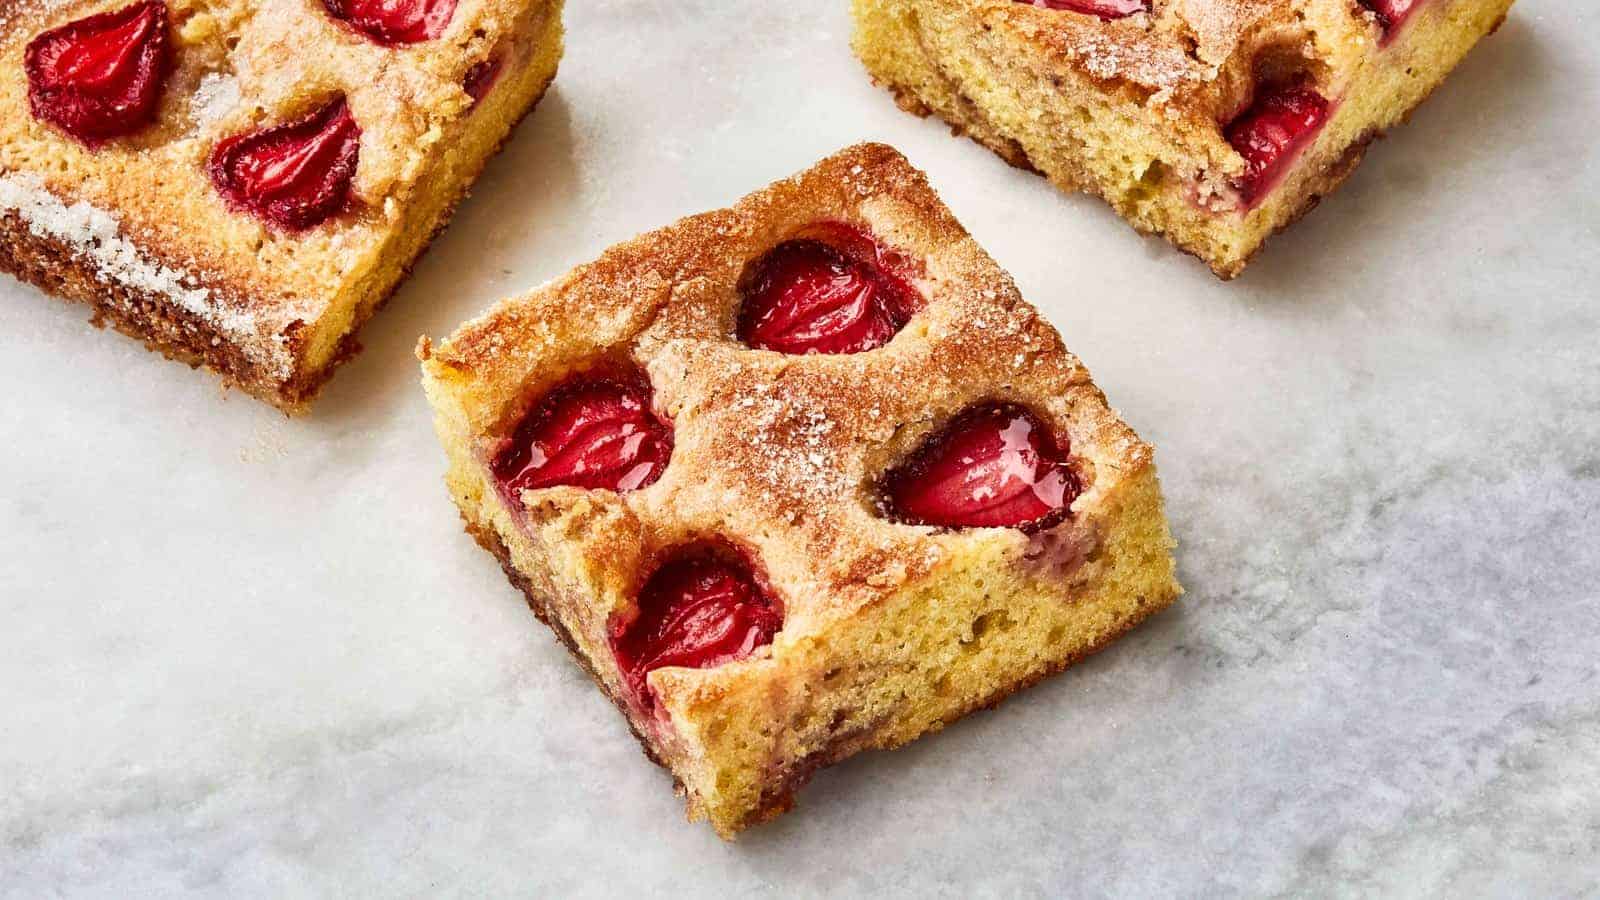 Strawberry Snacking Cake from Bon Appetit and Sarah Jampel